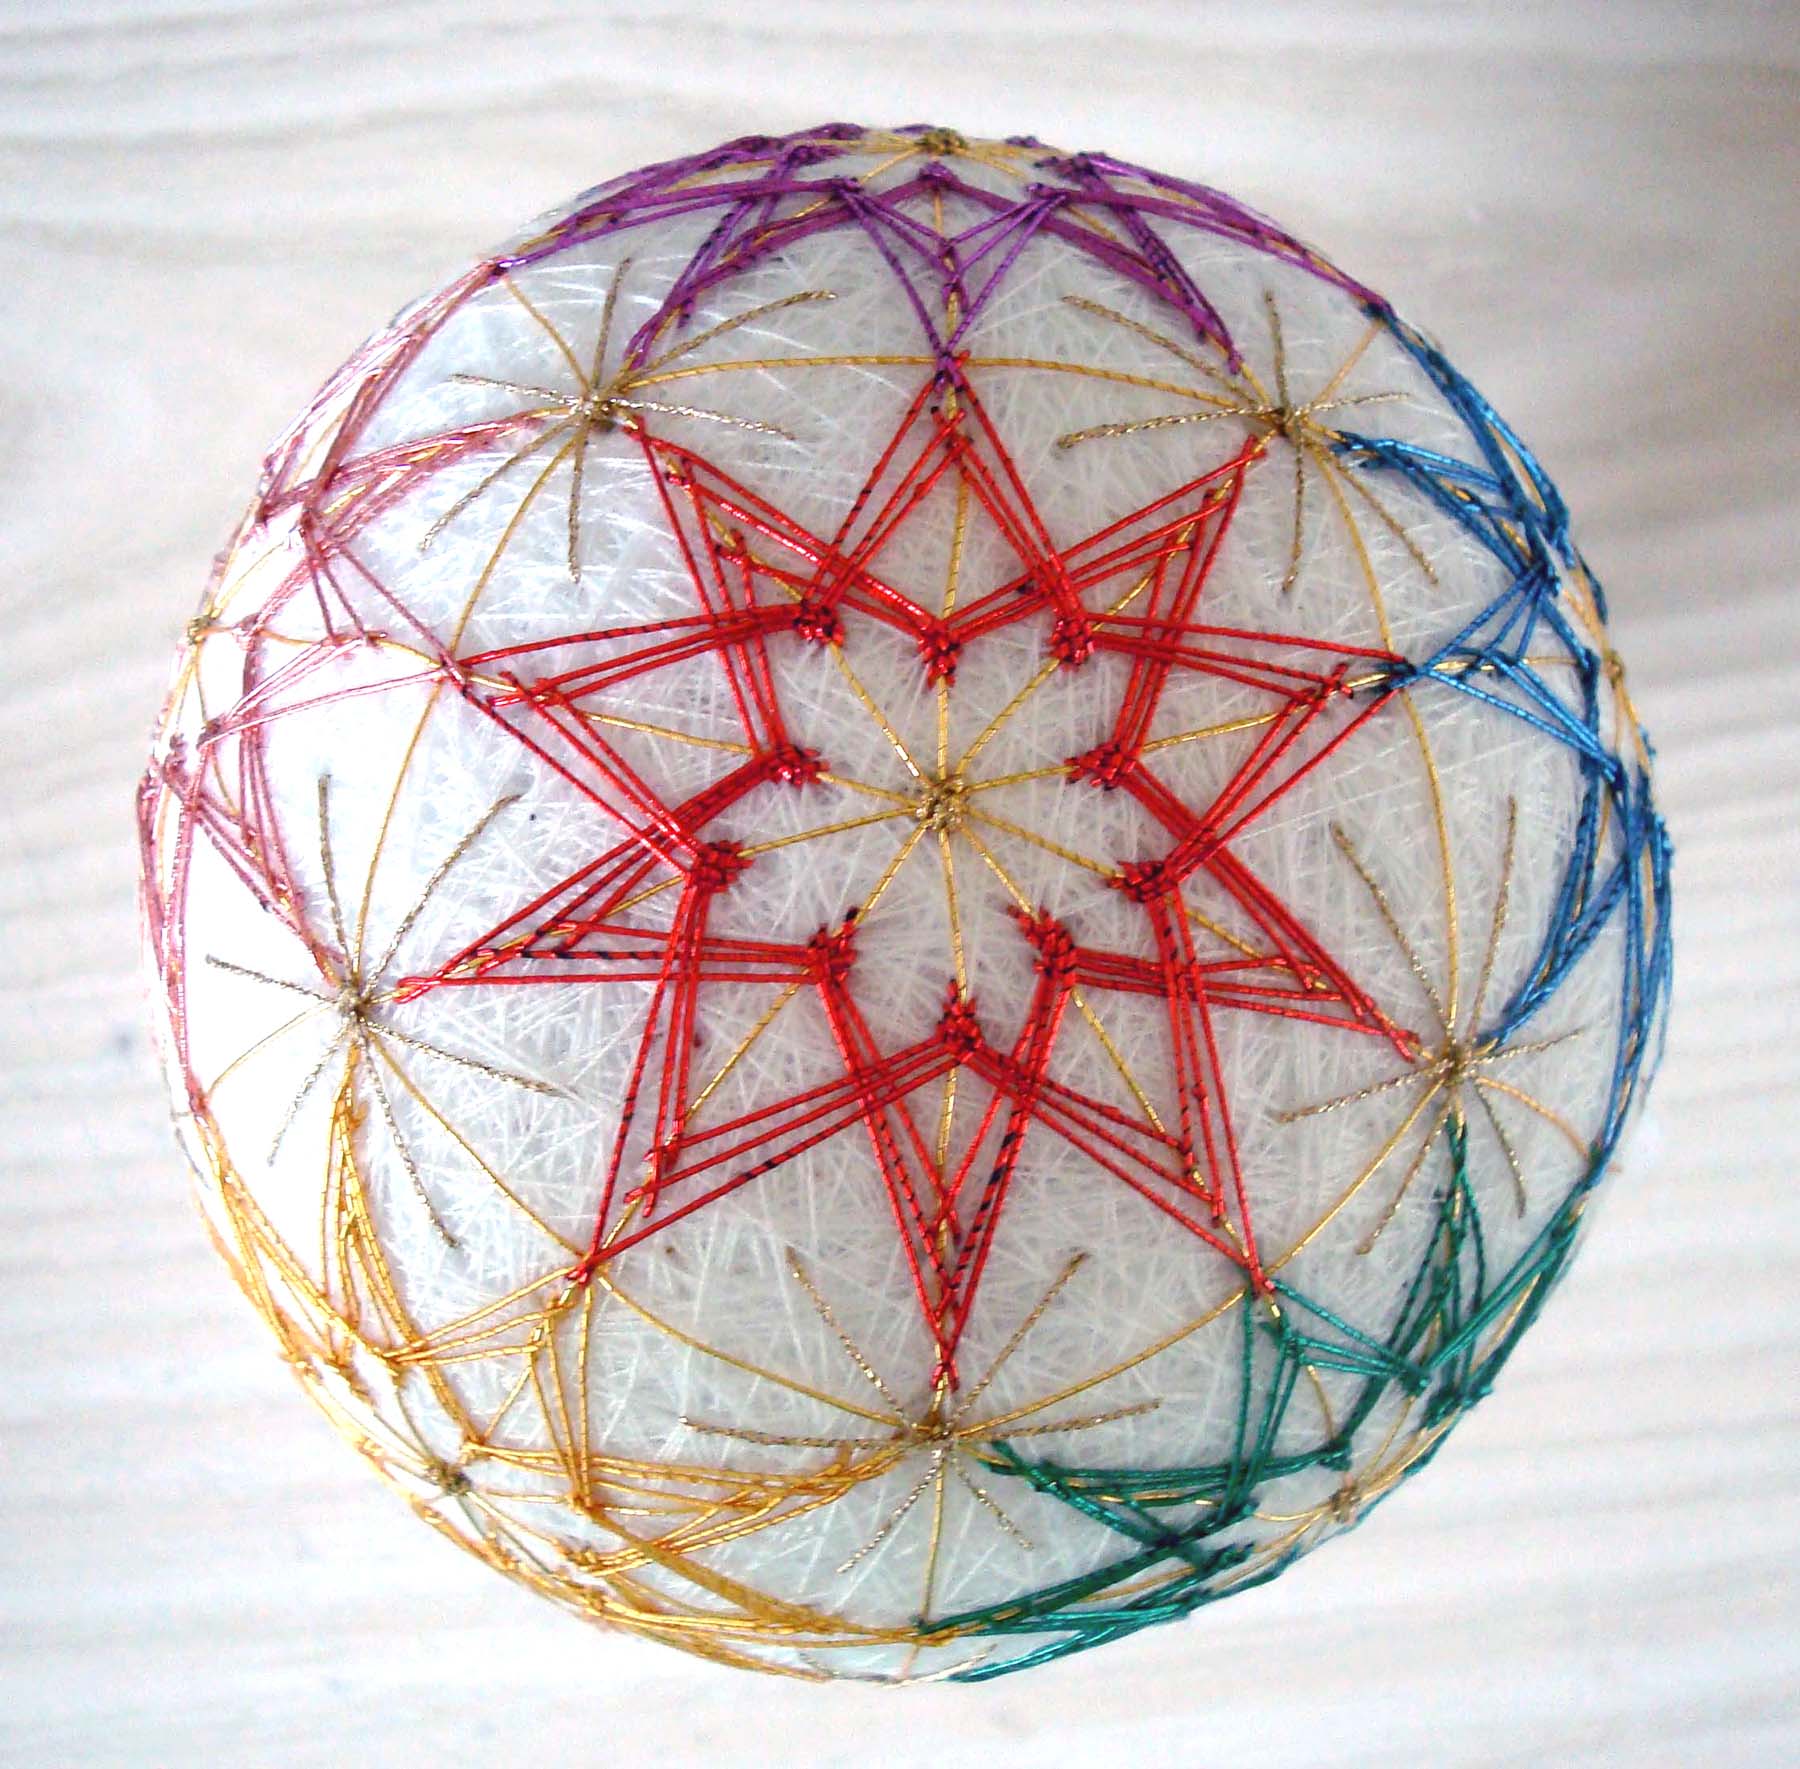 This Temari ball was created for Kreinik when we added Japan #7 thread colors. This specialty wrapped fiber has bright lustre and smooth finish. They are as elegant as they come, see http://www.kreinik.com/shops/Japan-Thread-7-5m-spools.html